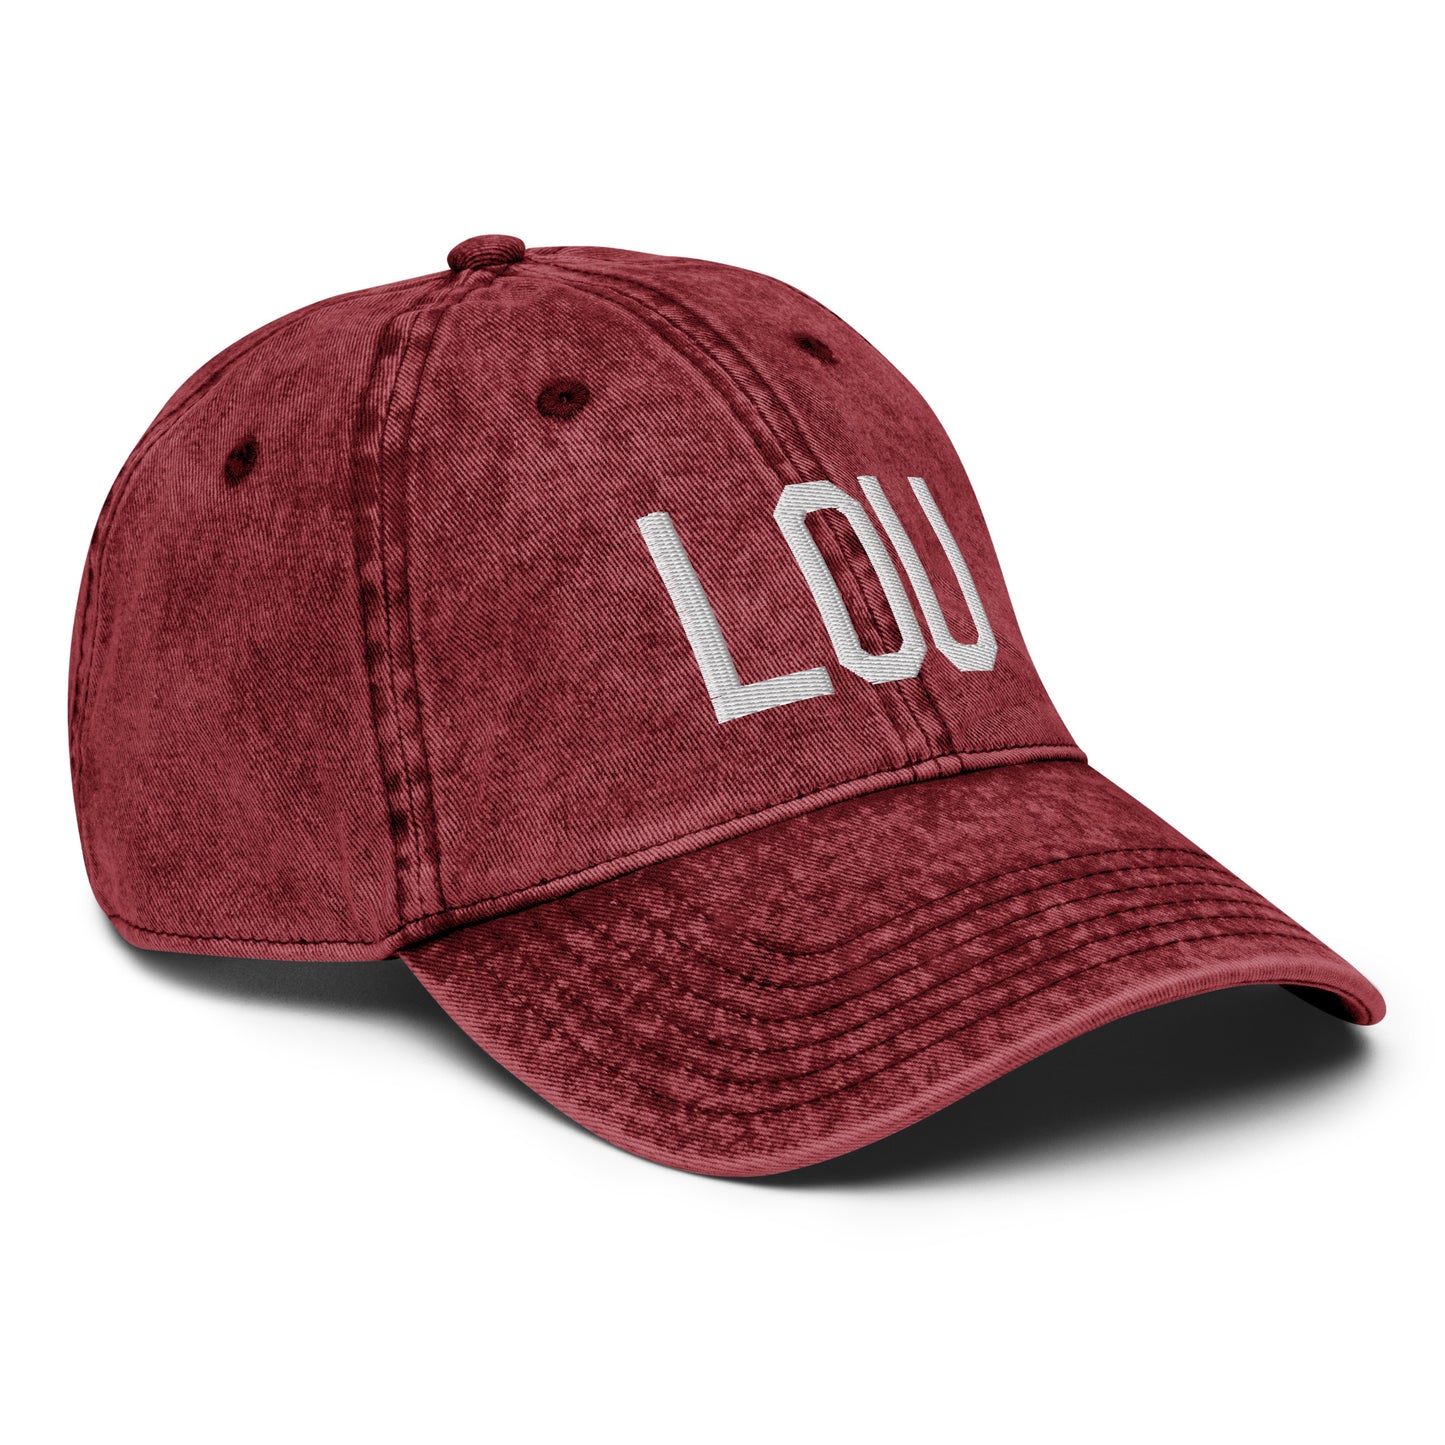 Airport Code Twill Cap - White • LOU Louisville • YHM Designs - Image 21